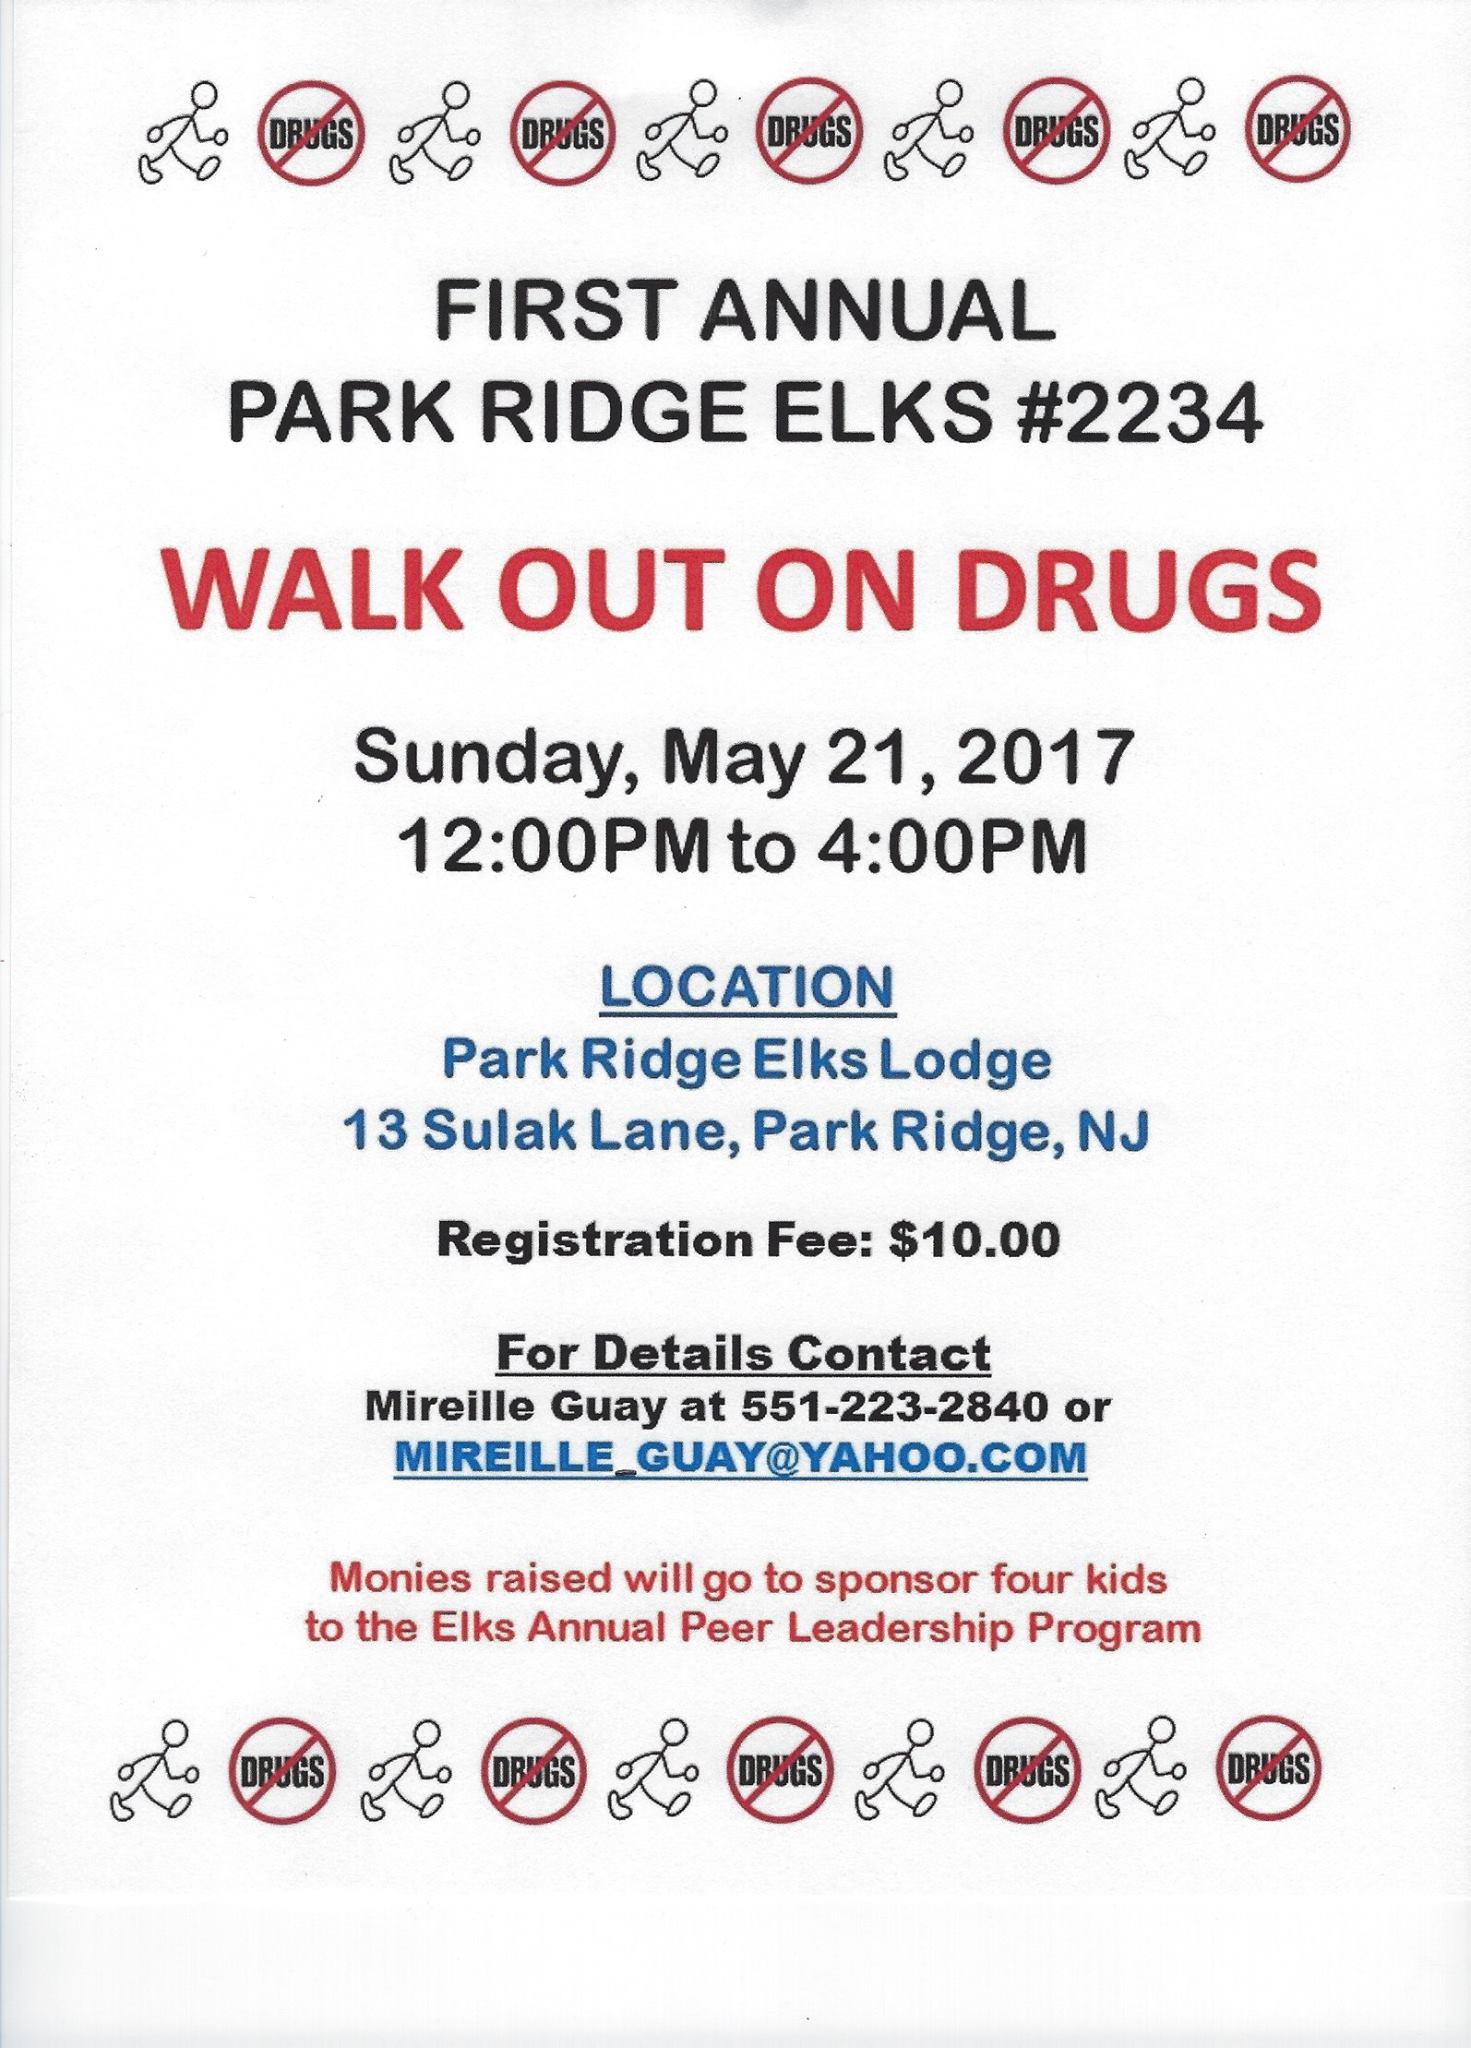 walk out on drugs event